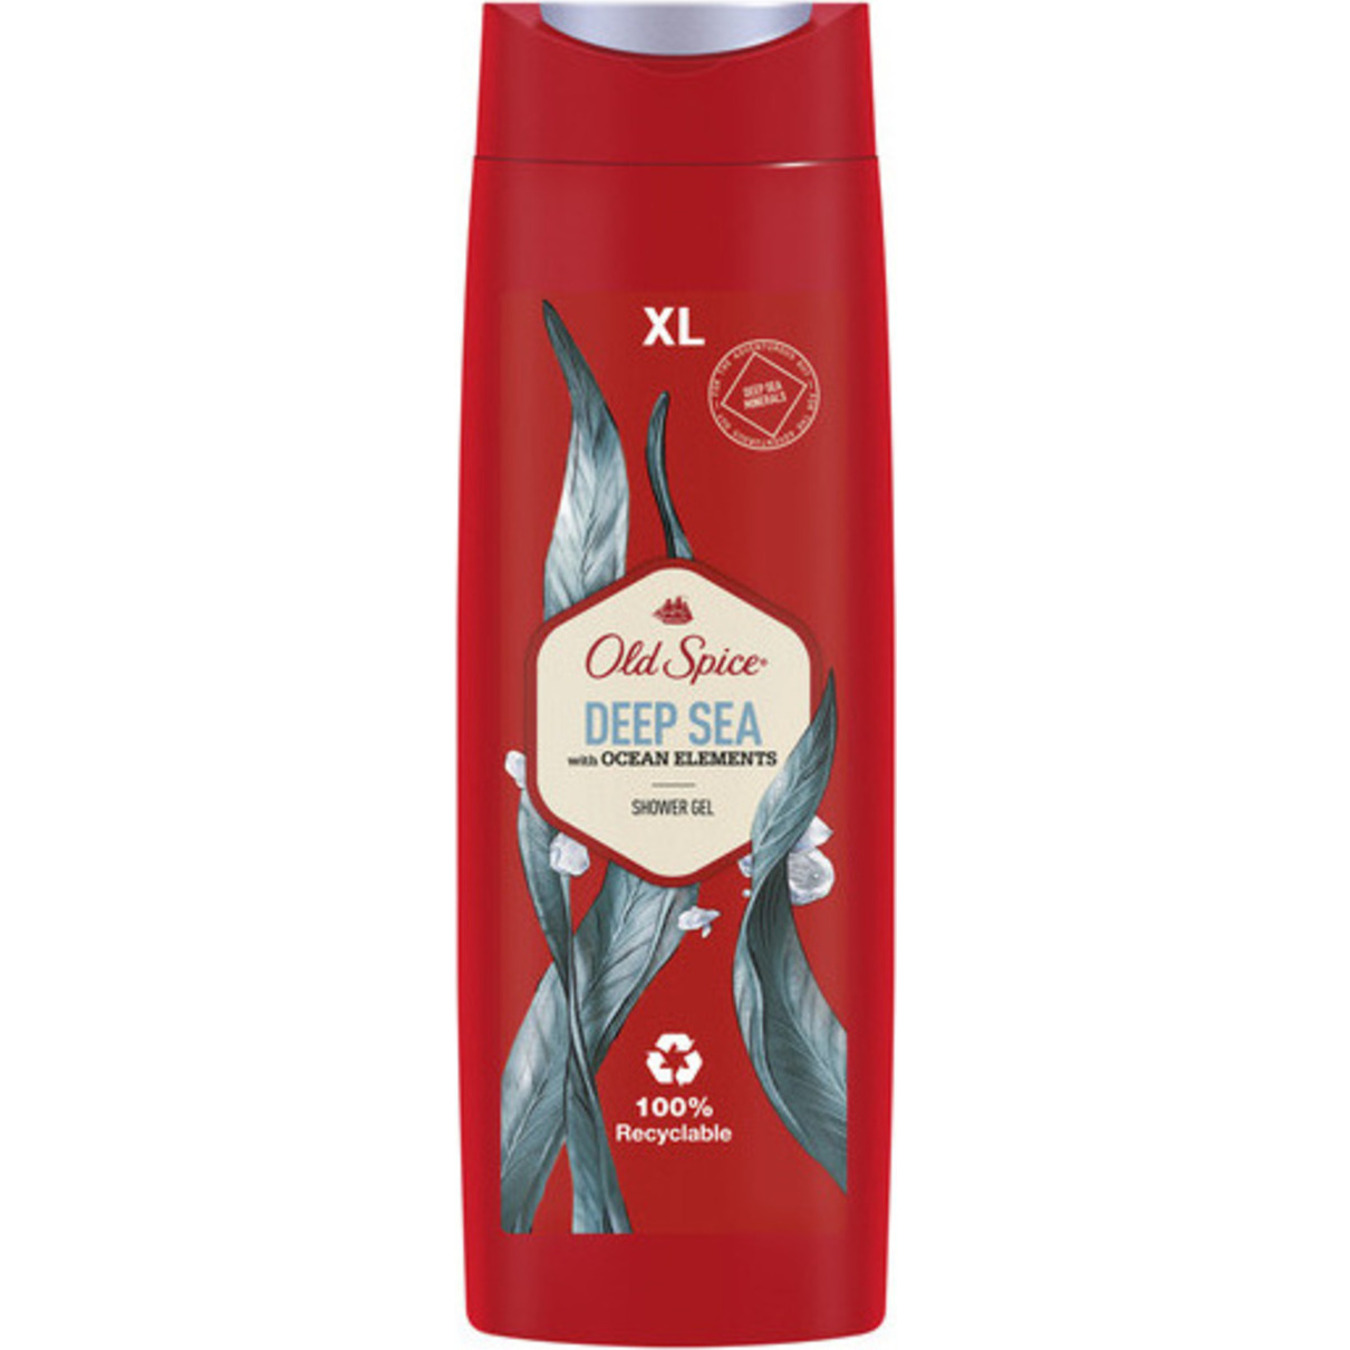 Shower gel Deep sea with Minerals Old Spice 400 ml